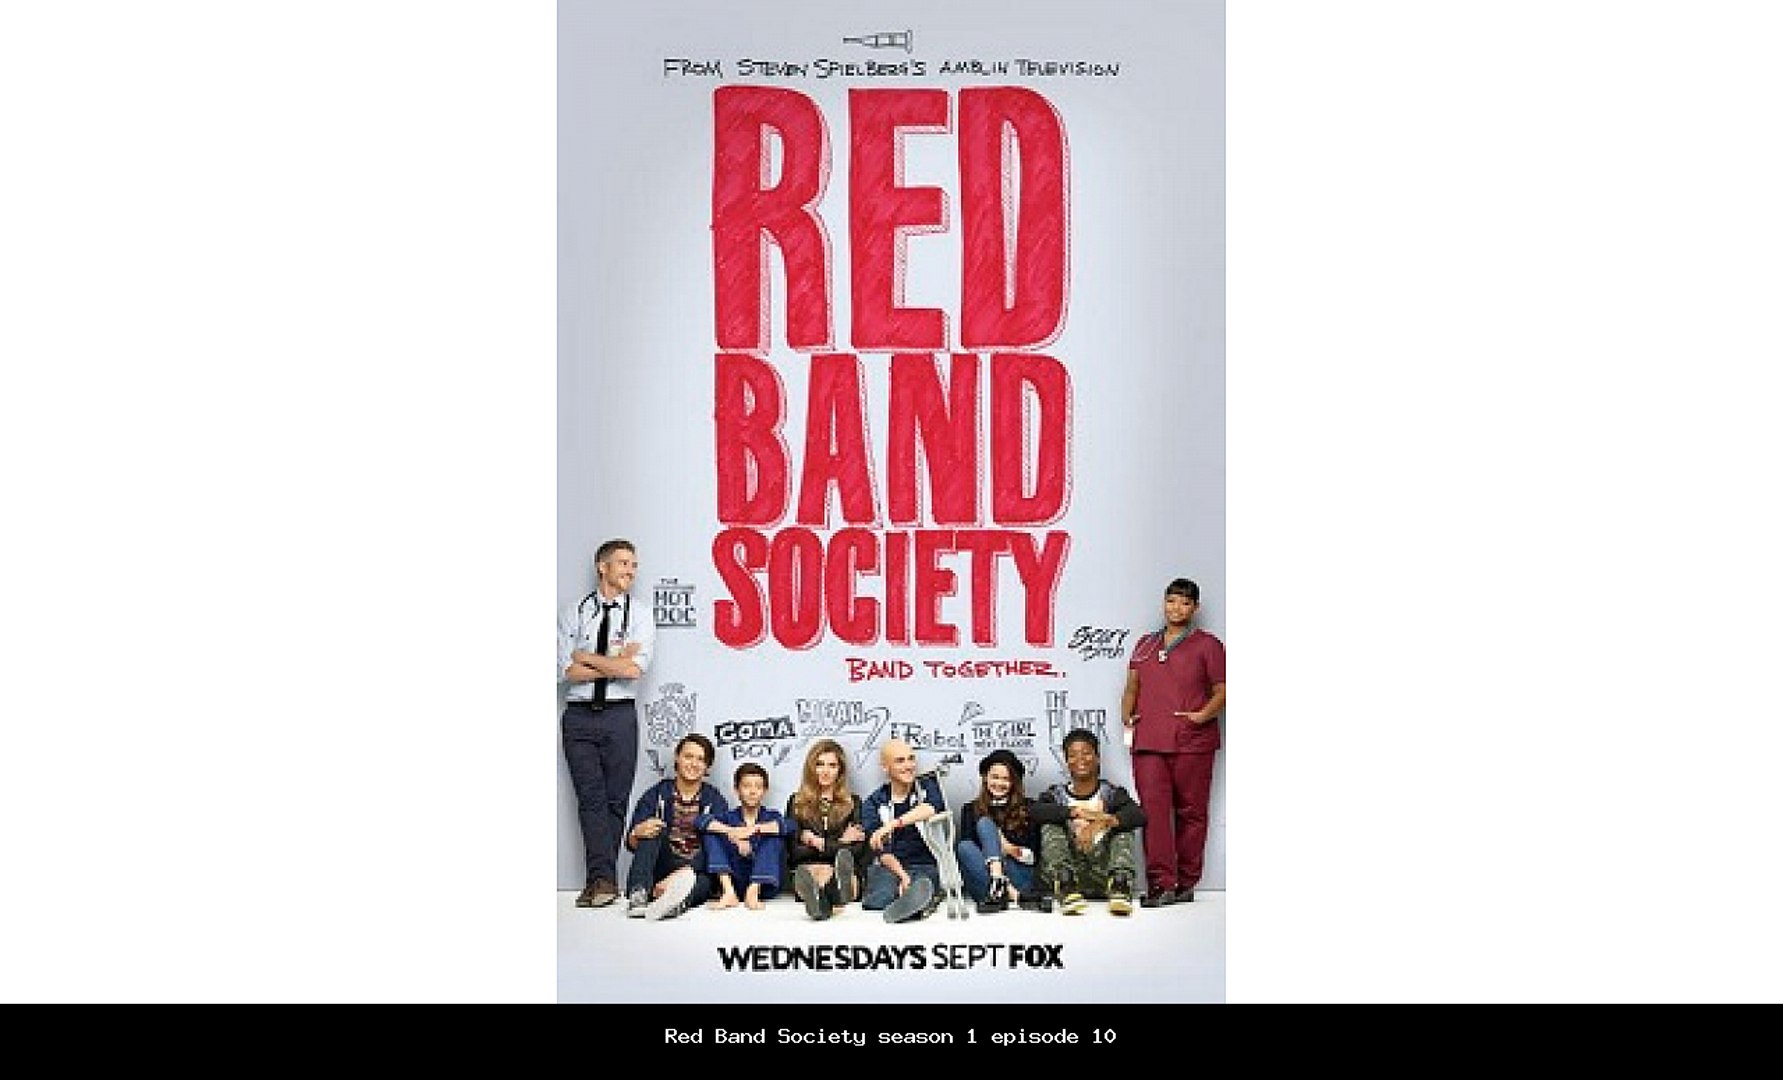 Red Band Society season 1 episode 10 s1e10 - Dailymotion Video